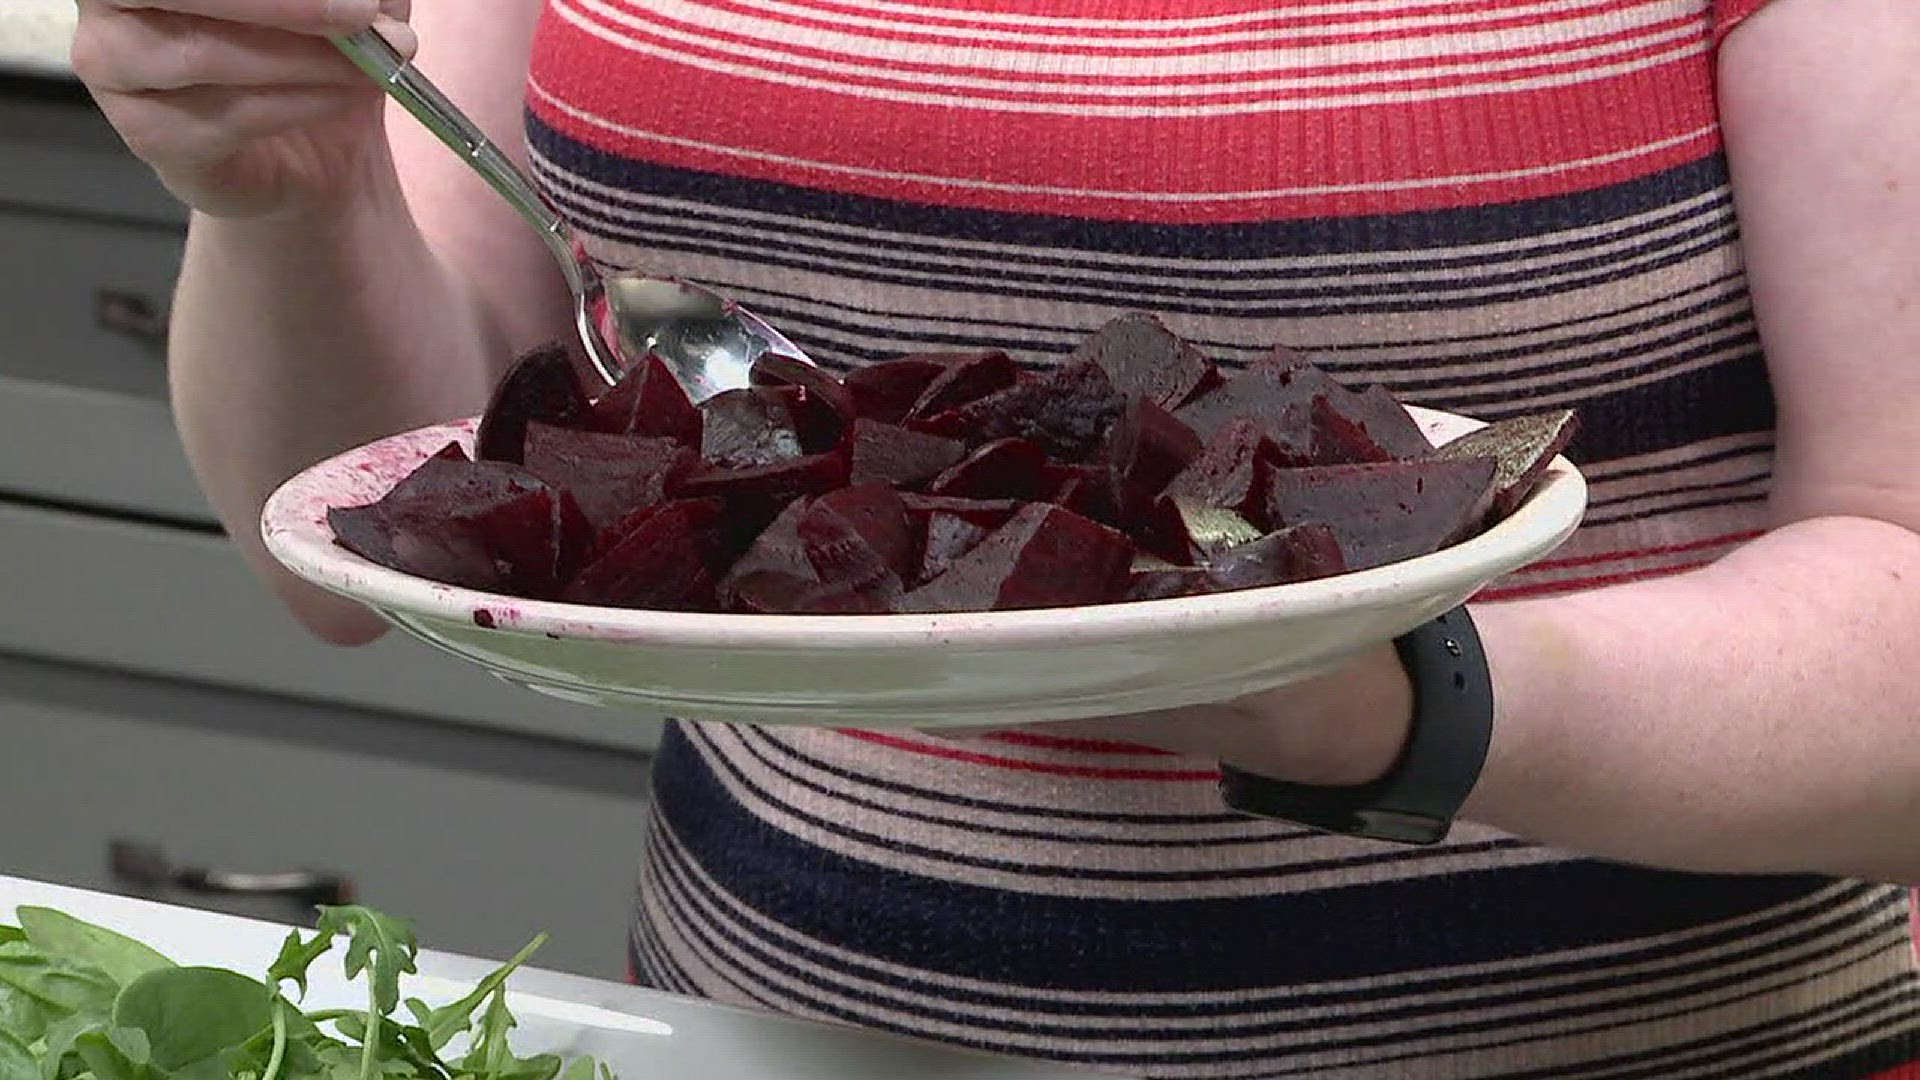 Beets are in season starting in June, so why not buy them fresh? Andrea Michaels shows us how about an easy hour of prep time can take advantage of that peak flavor!